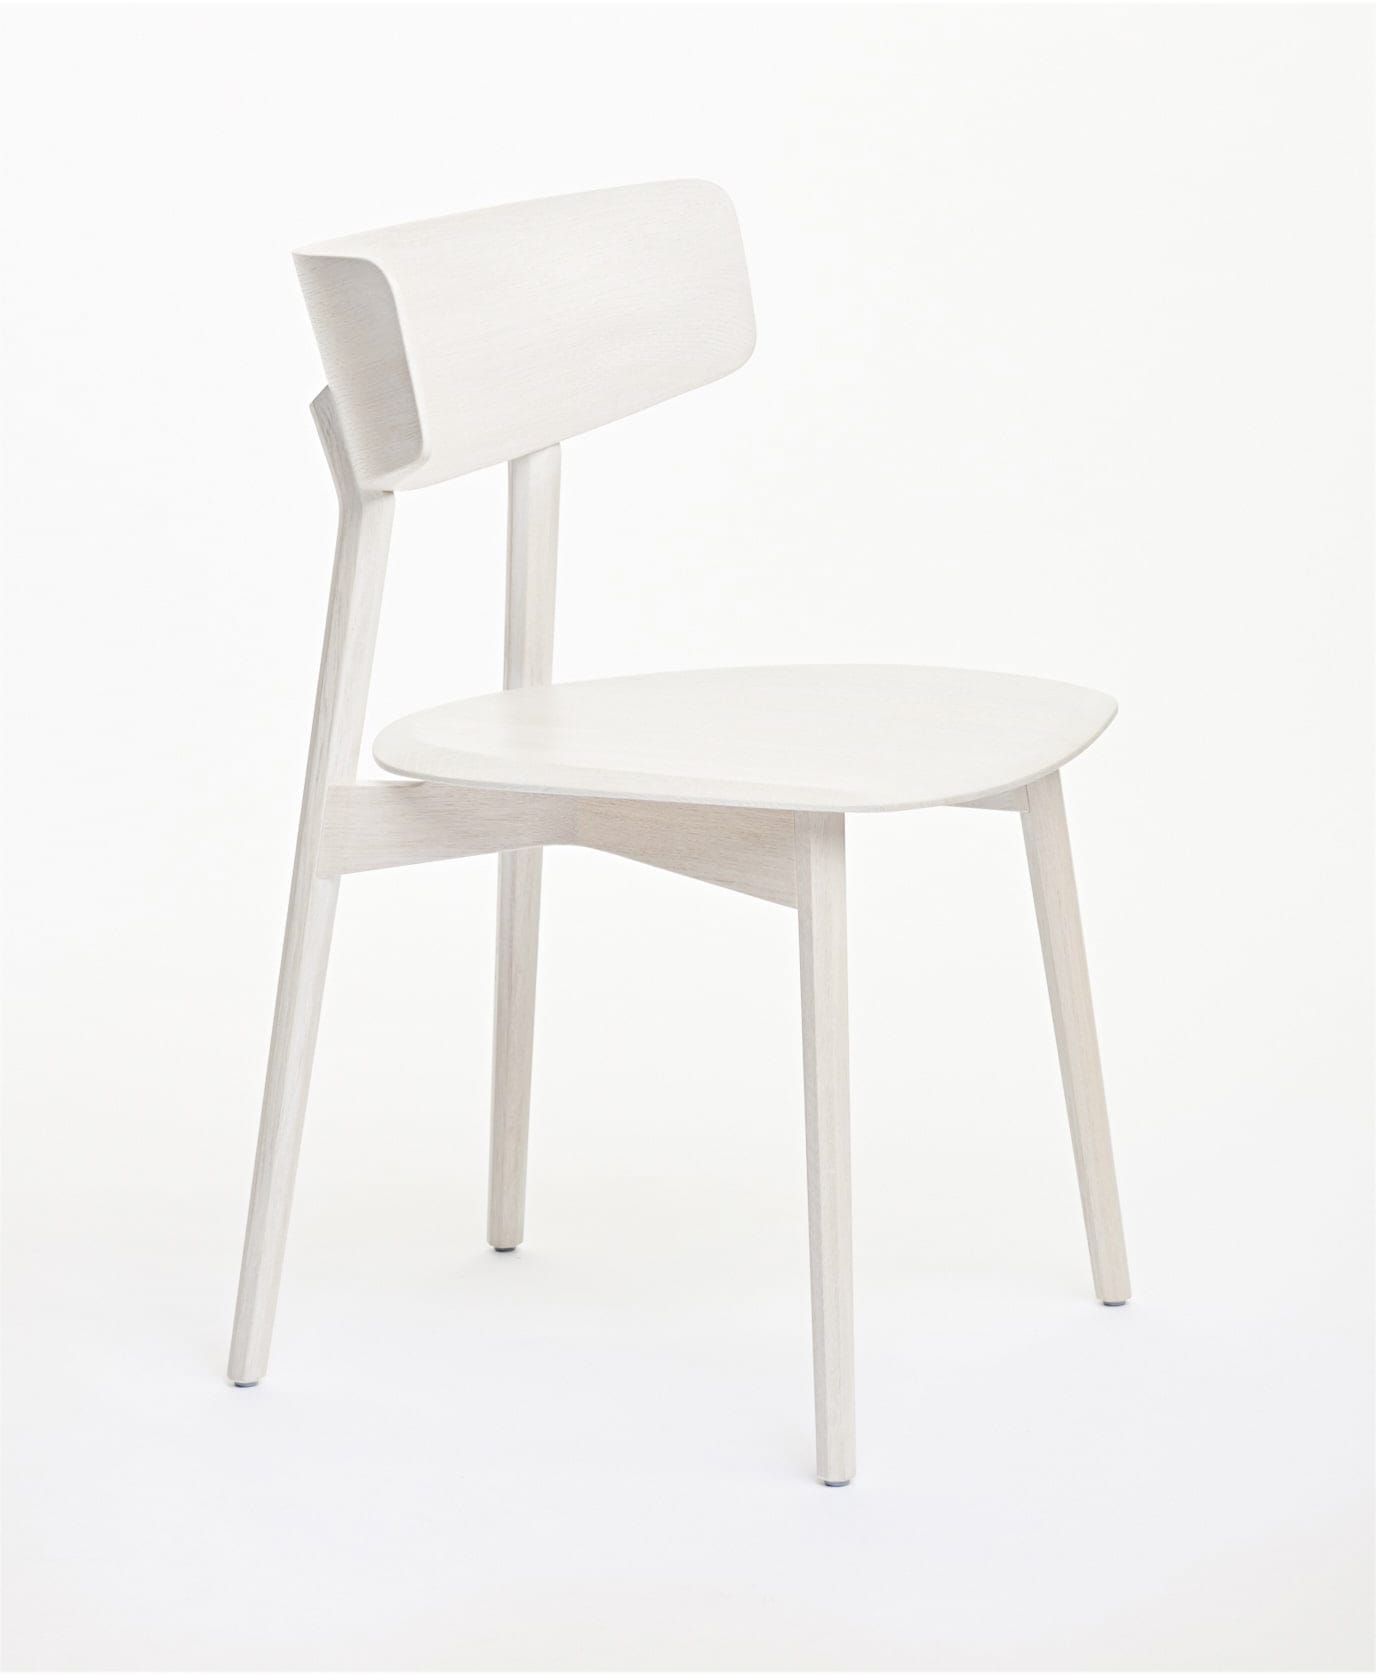 Marlon Solid Wood Chair with wide back in modern dynamic shape made of wood with light lacquer finish